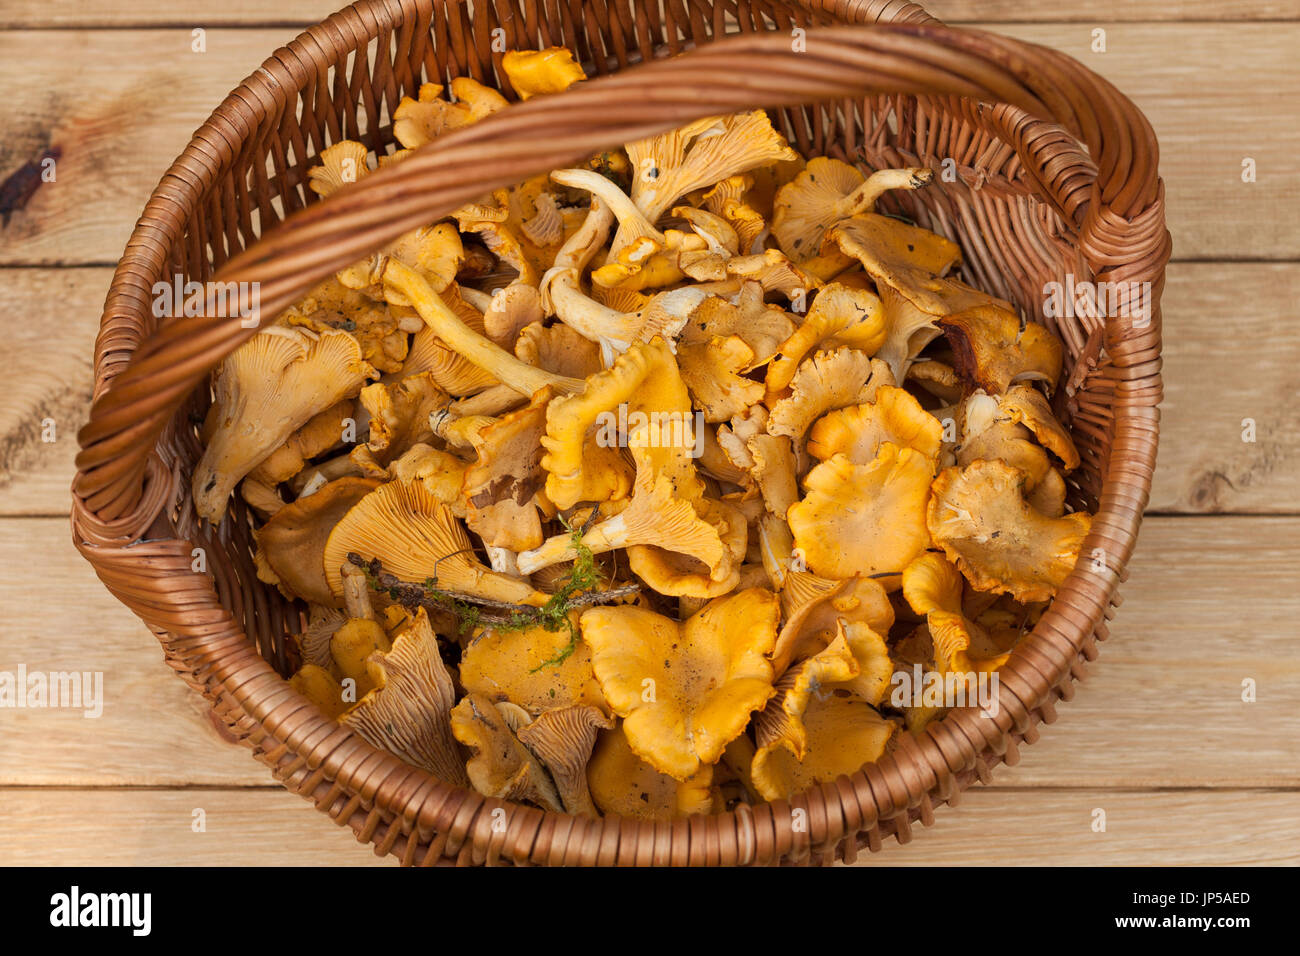 Mushrooms Chanterelle. Edible Mushrooms Chanterelle In Wicker Basket On Wooden Table. Top View. Stock Photo